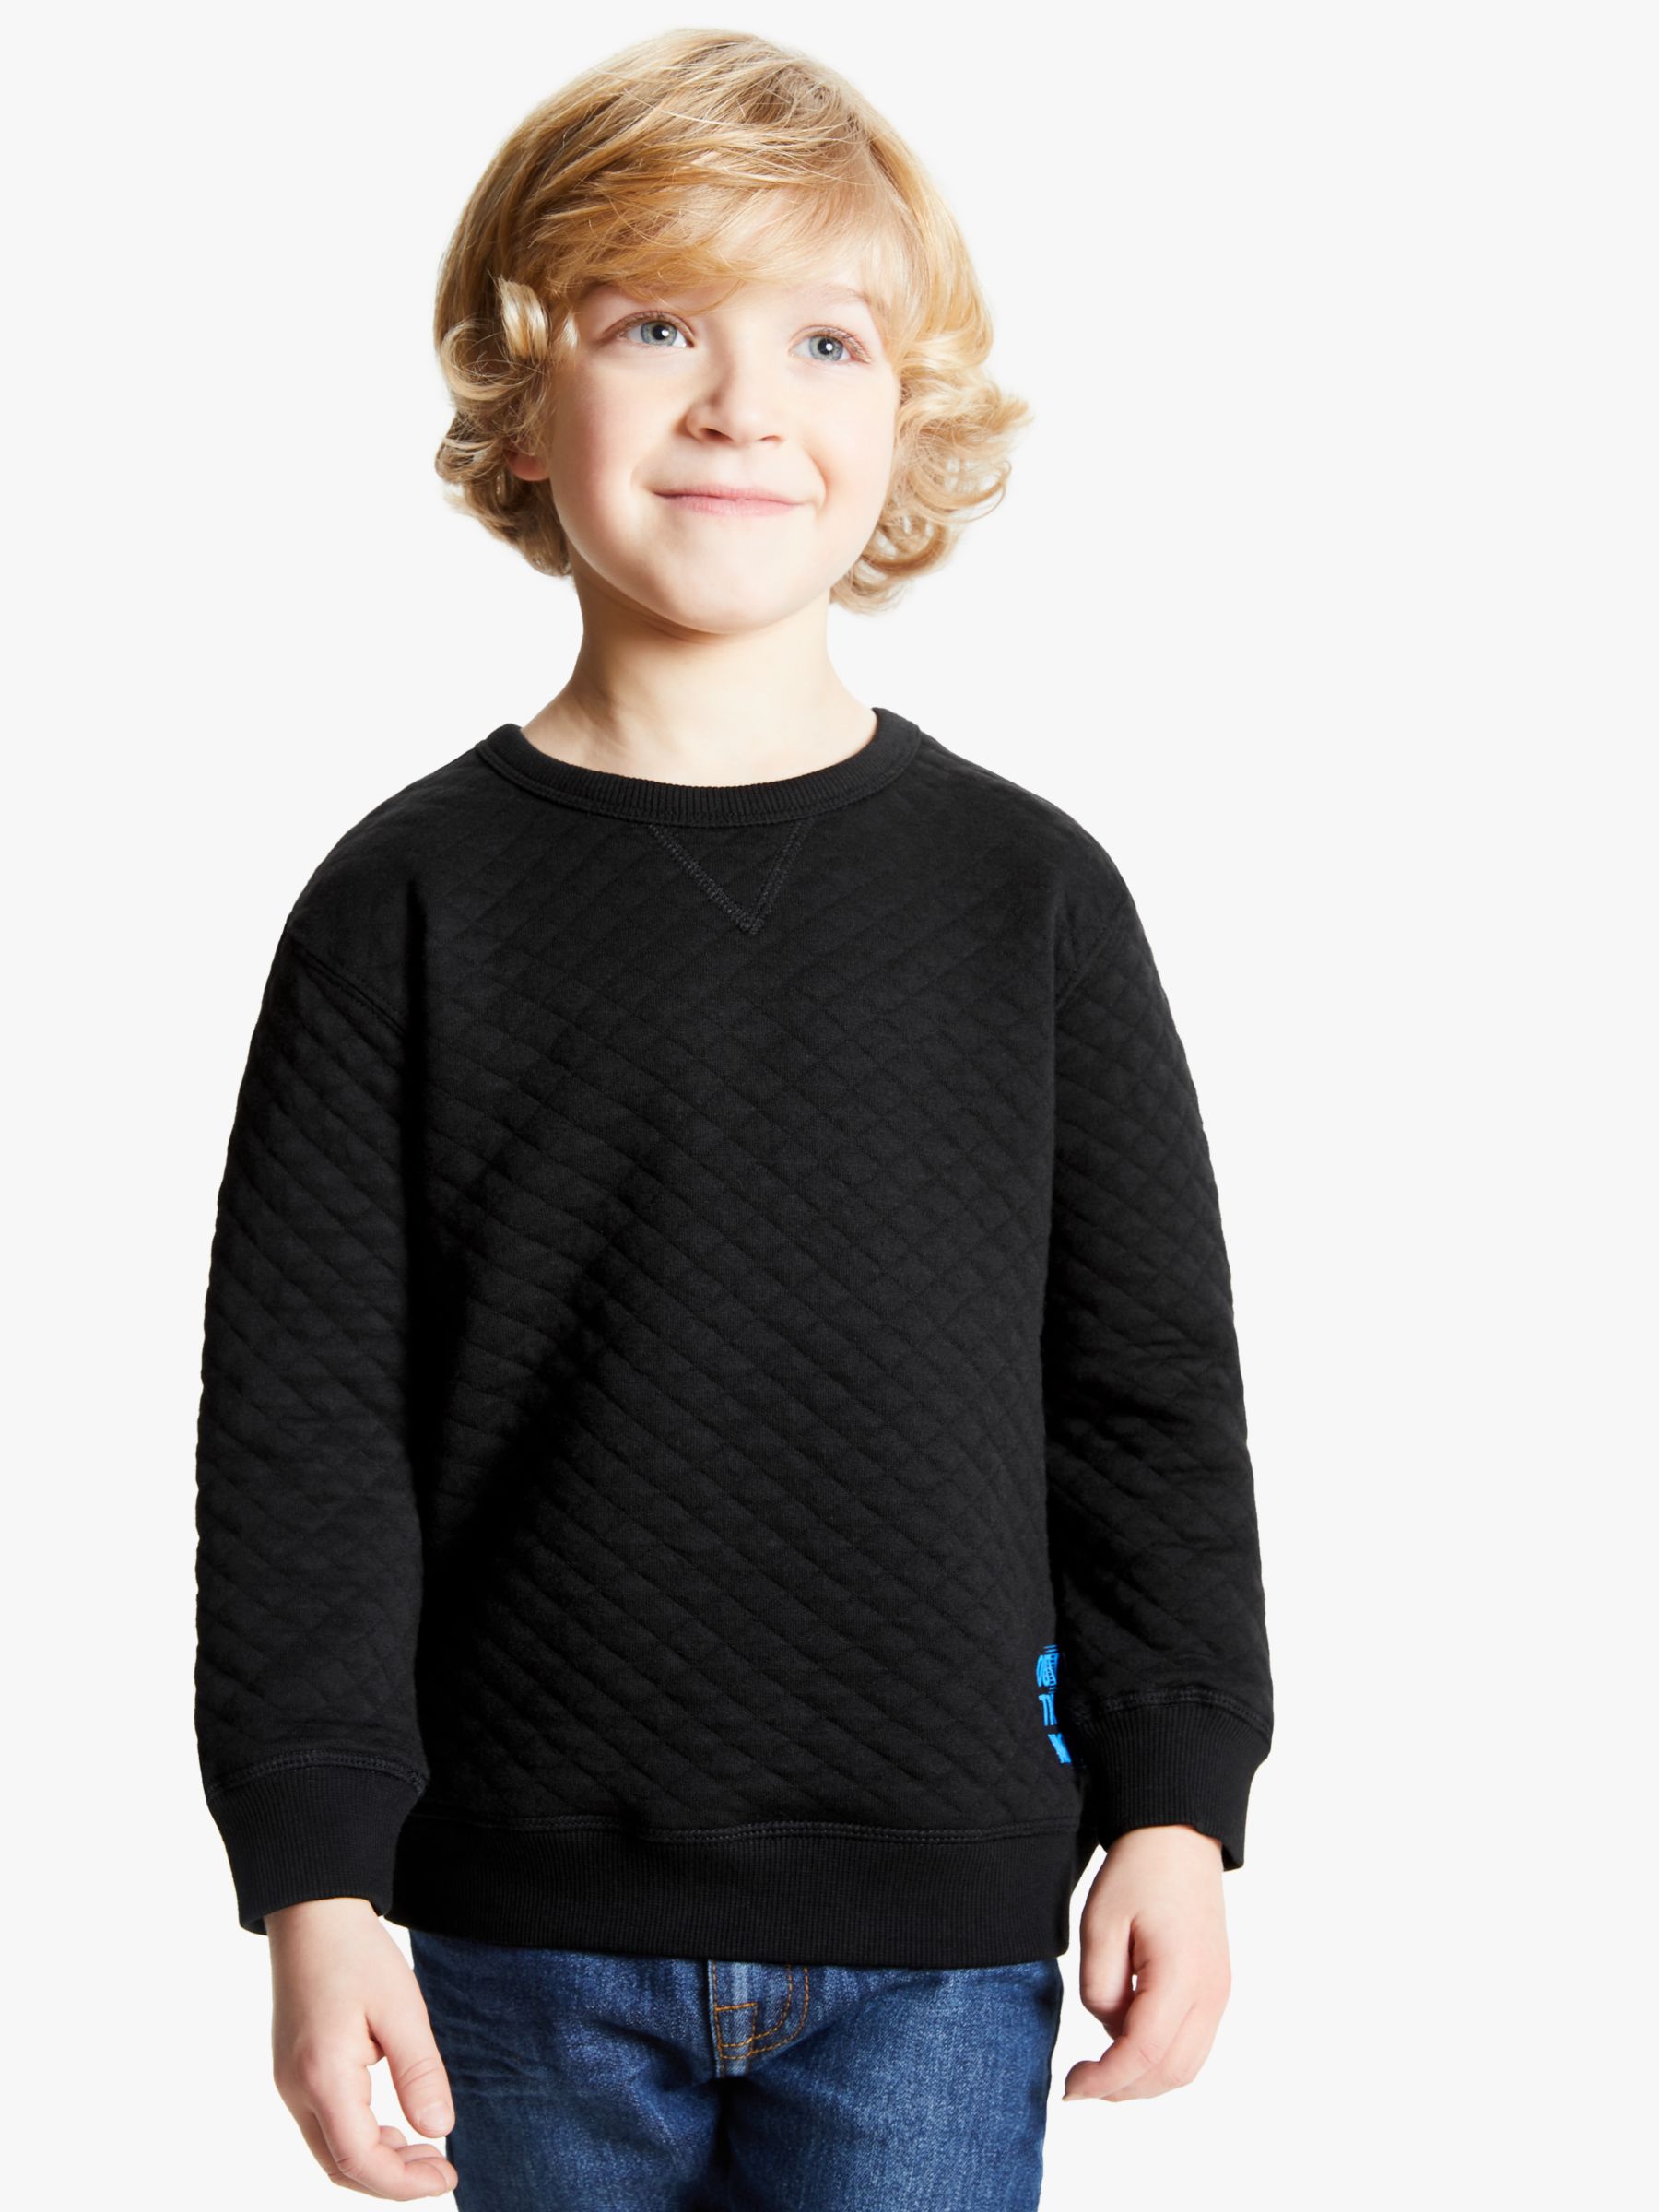 Image of John Lewis and Partners Boys Quilted Crew Neck Sweatshirt Charcoal Grey